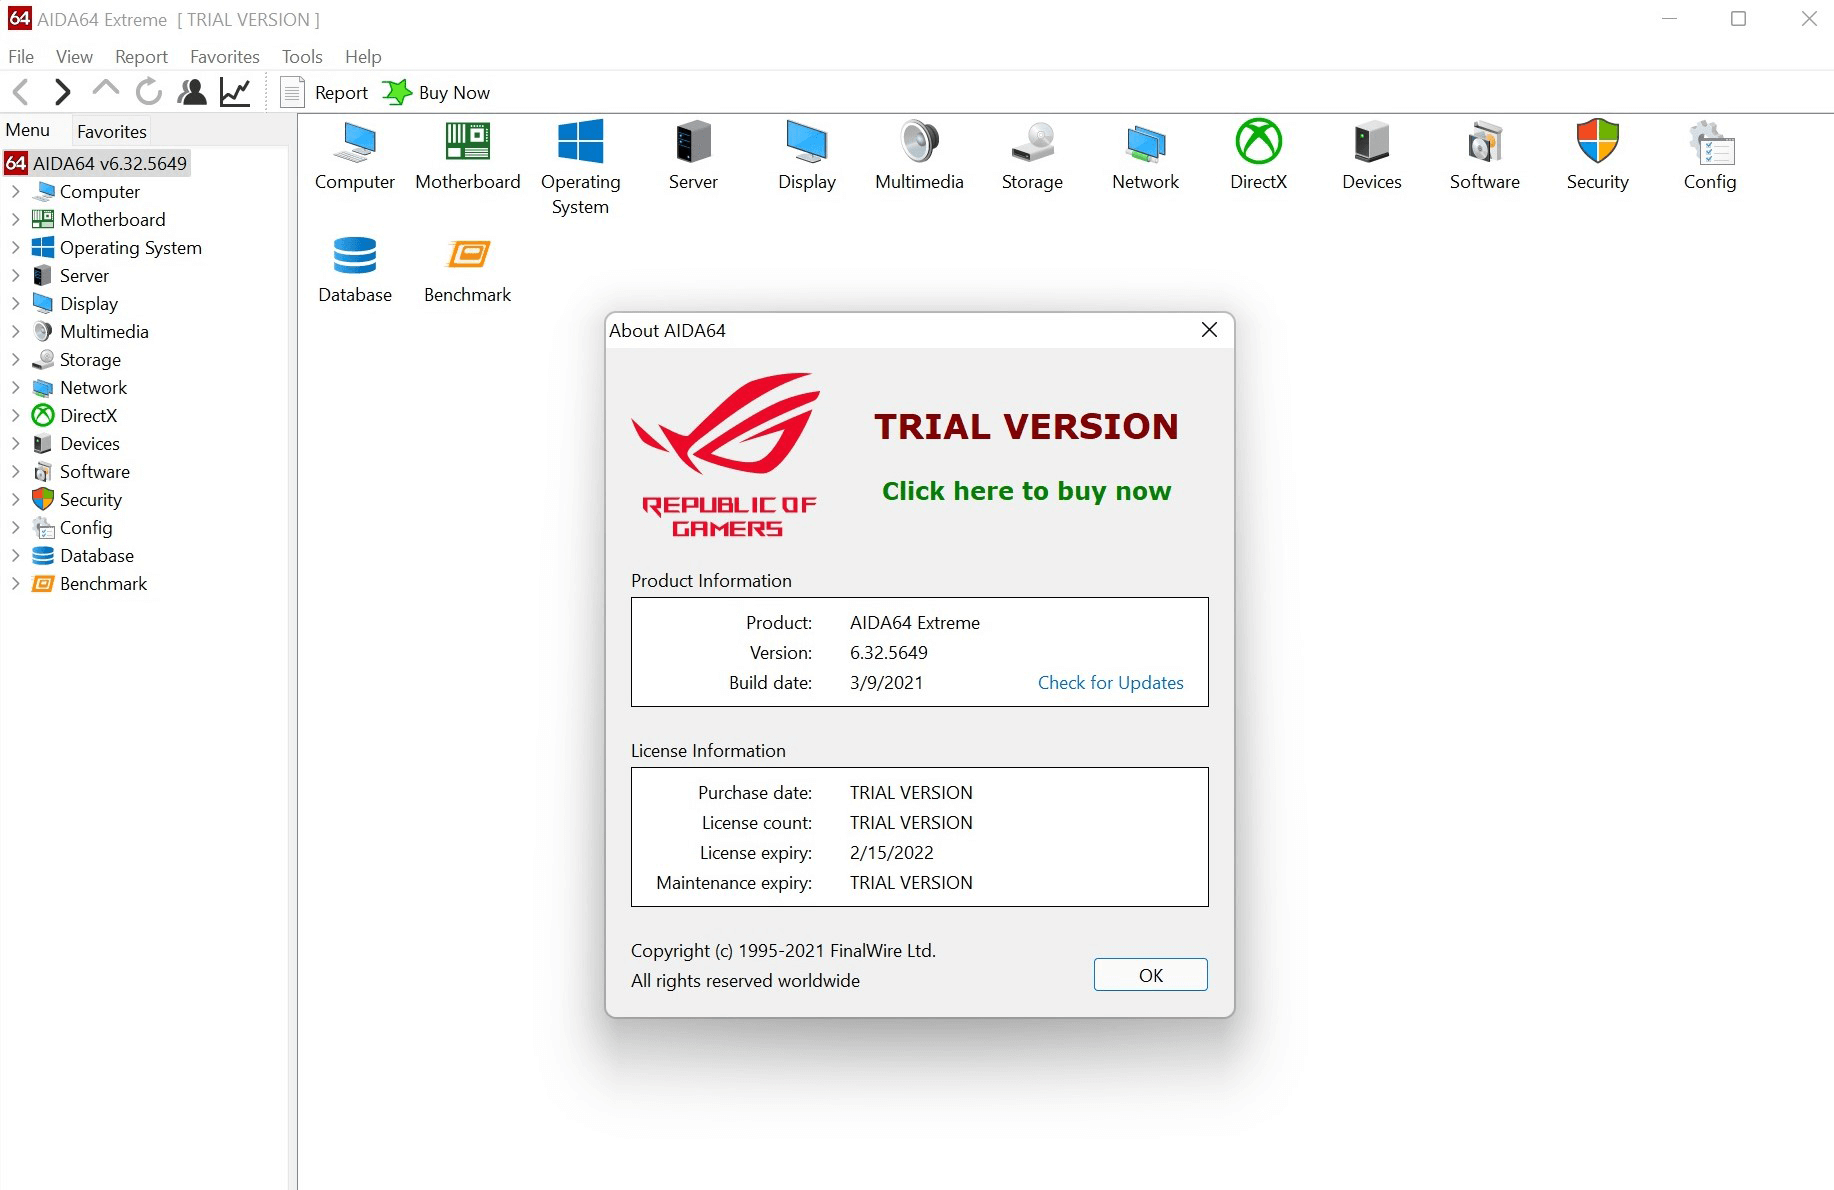 ROG Strix Z790-F comes with a free 60 day trial of AIDA64 Extreme